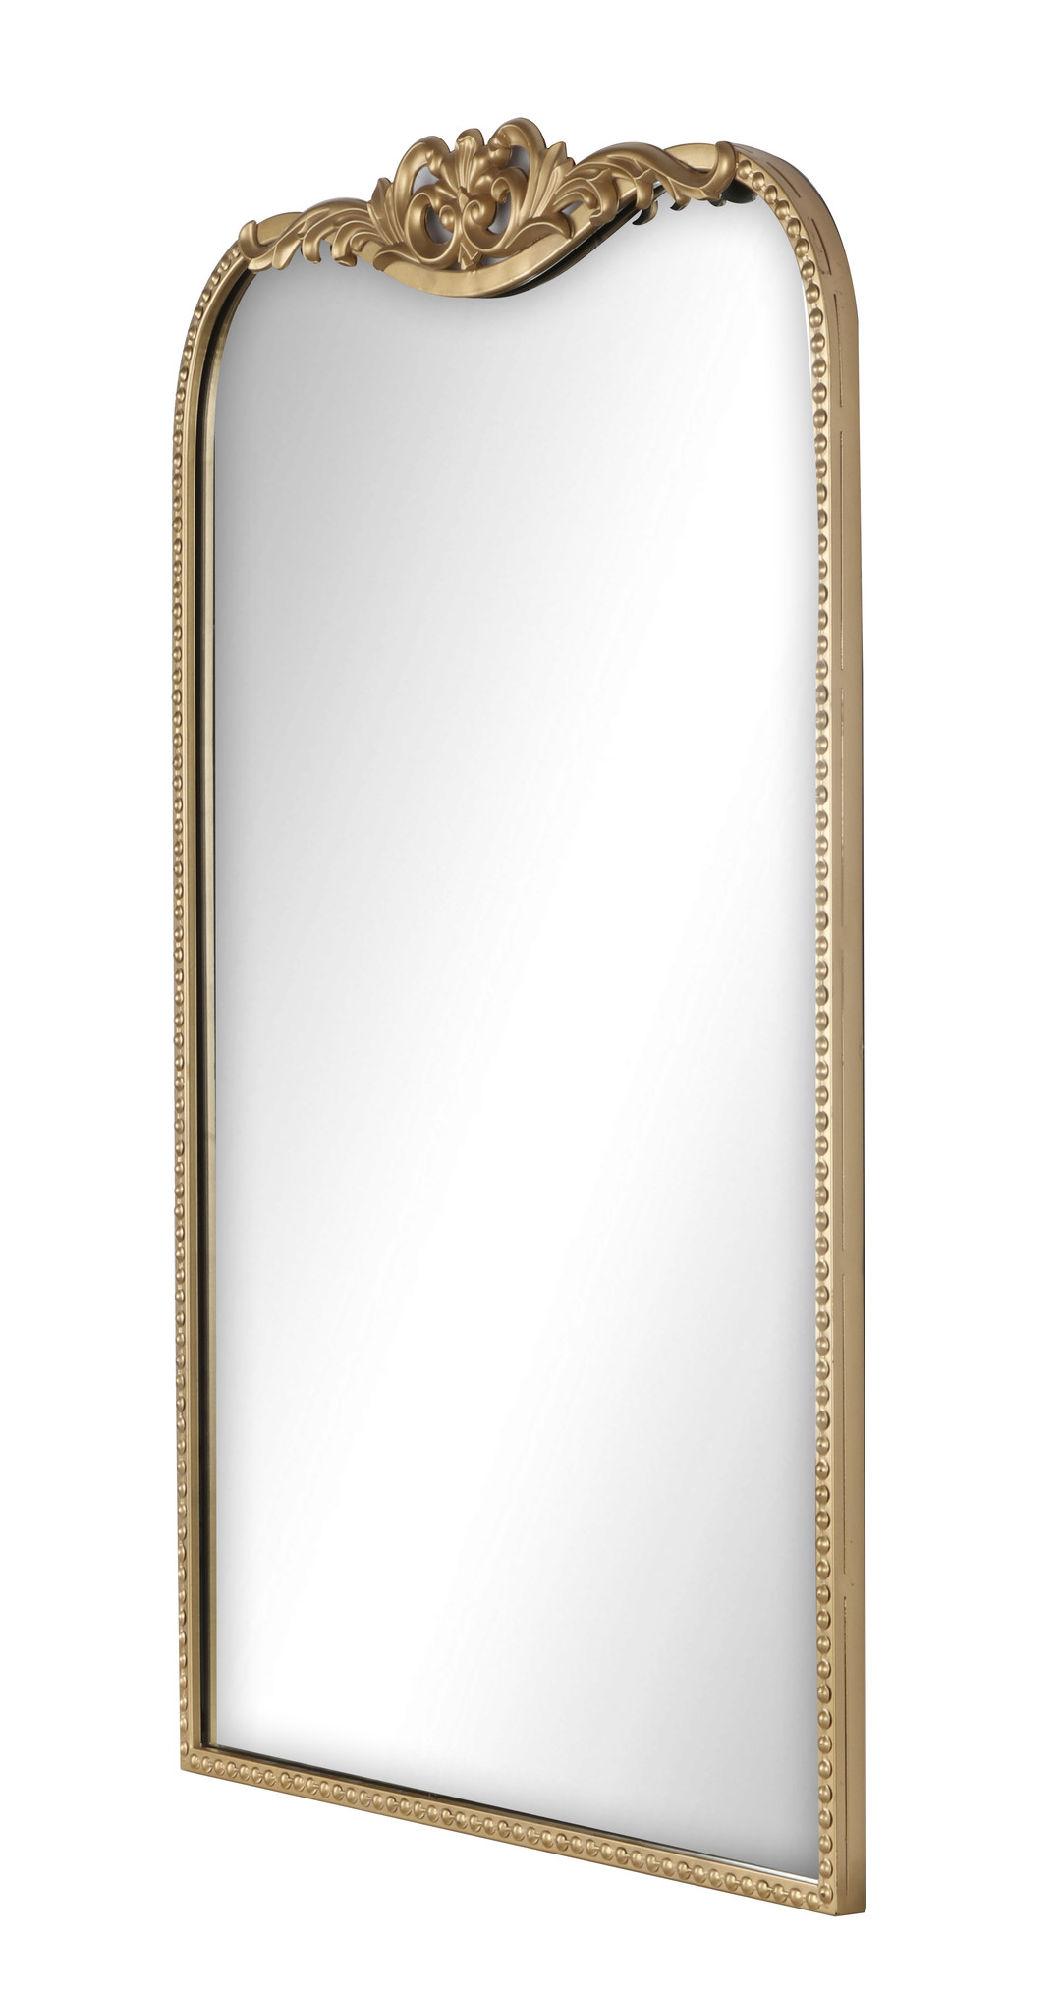 Metal Wall Mirror Gold Mirror for Wall Decor Gold Color Modern Design Metal Wall Mirror